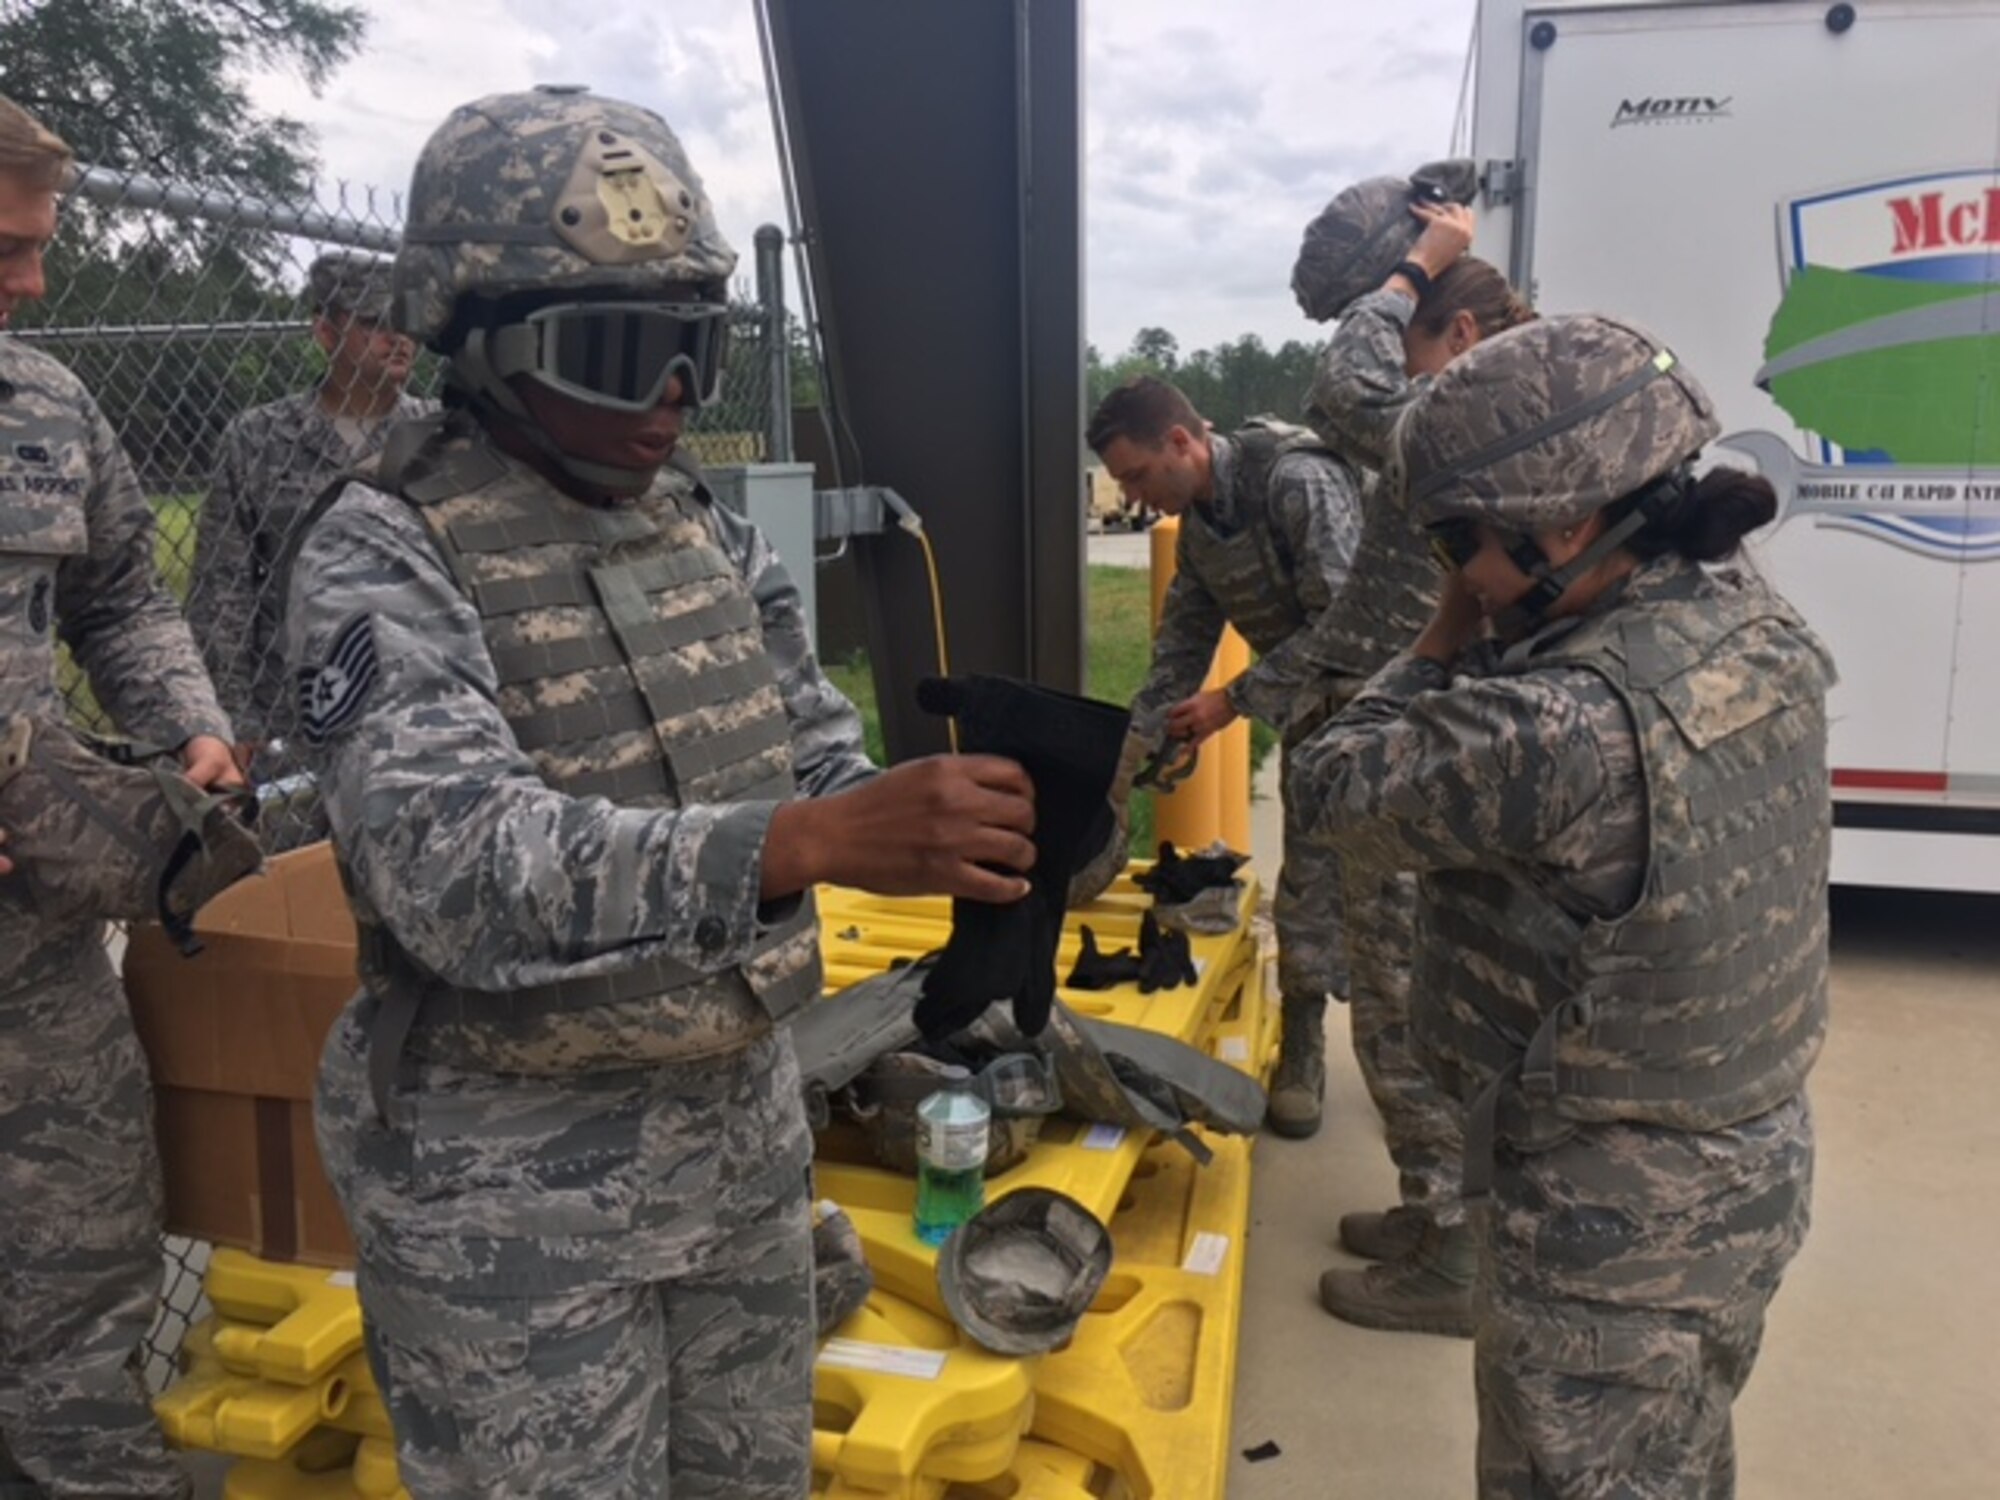 Class members from Emerge Moody put on protective gear prior to experiencing a Mine-Resistant Ambush Protected vehicle egress assistance trainer May 2, 2017, at Moody Air Force Base, Ga. Emerge Moody spent the day with the 820th BDG learning about the organization’s mission and capabilities. (Courtesy Photo)